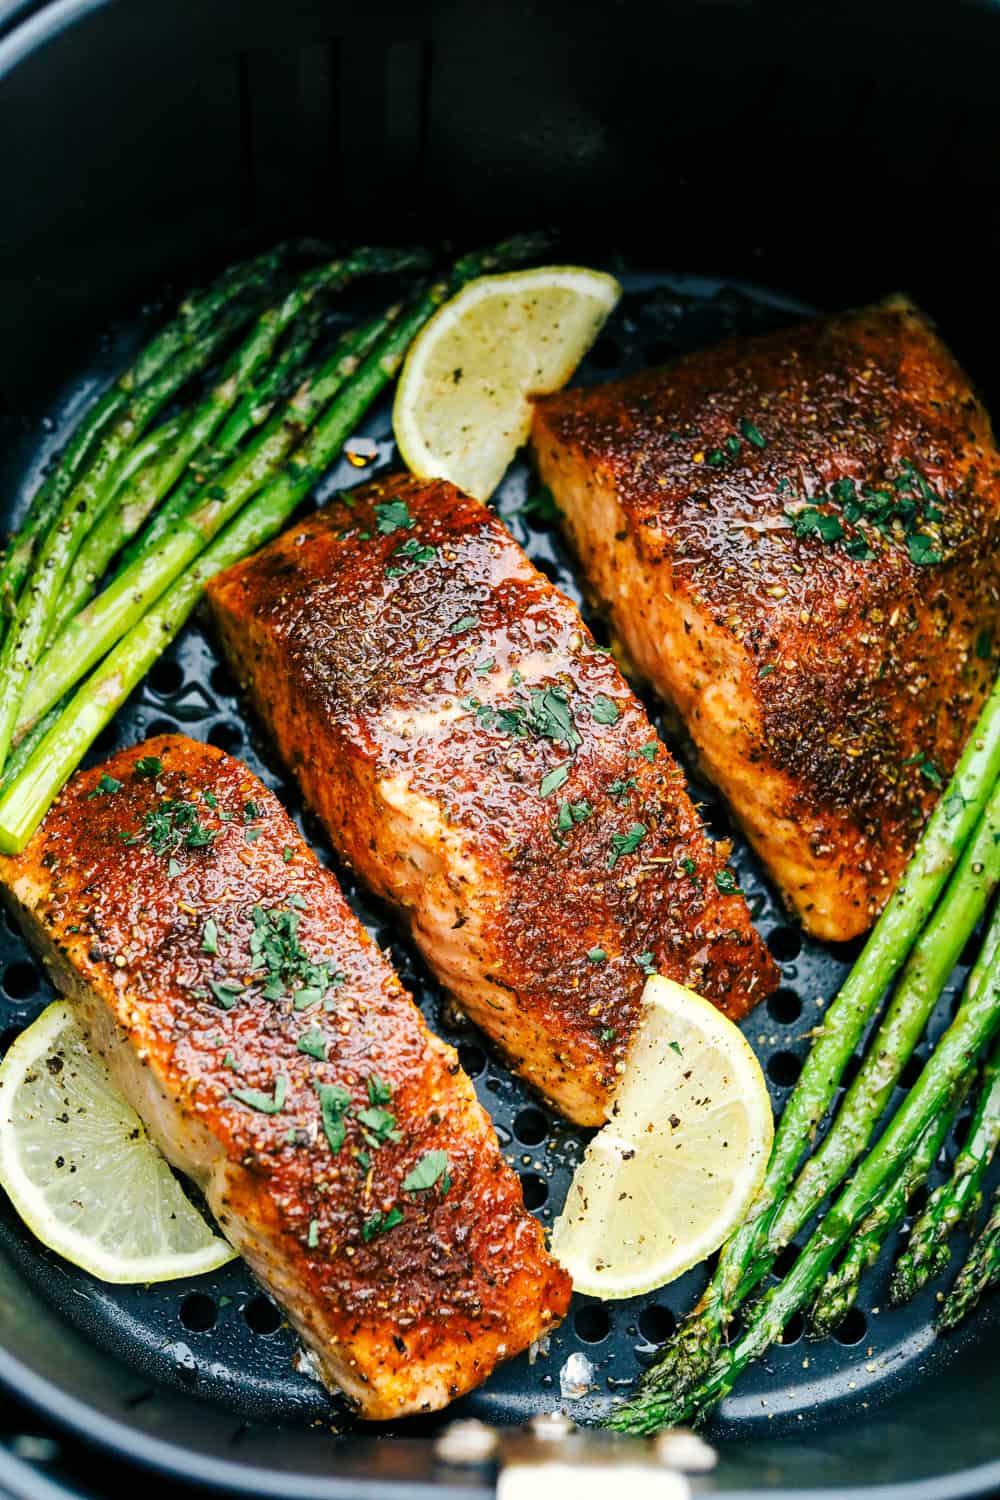 How To Cook Salmon In An Air Fryer